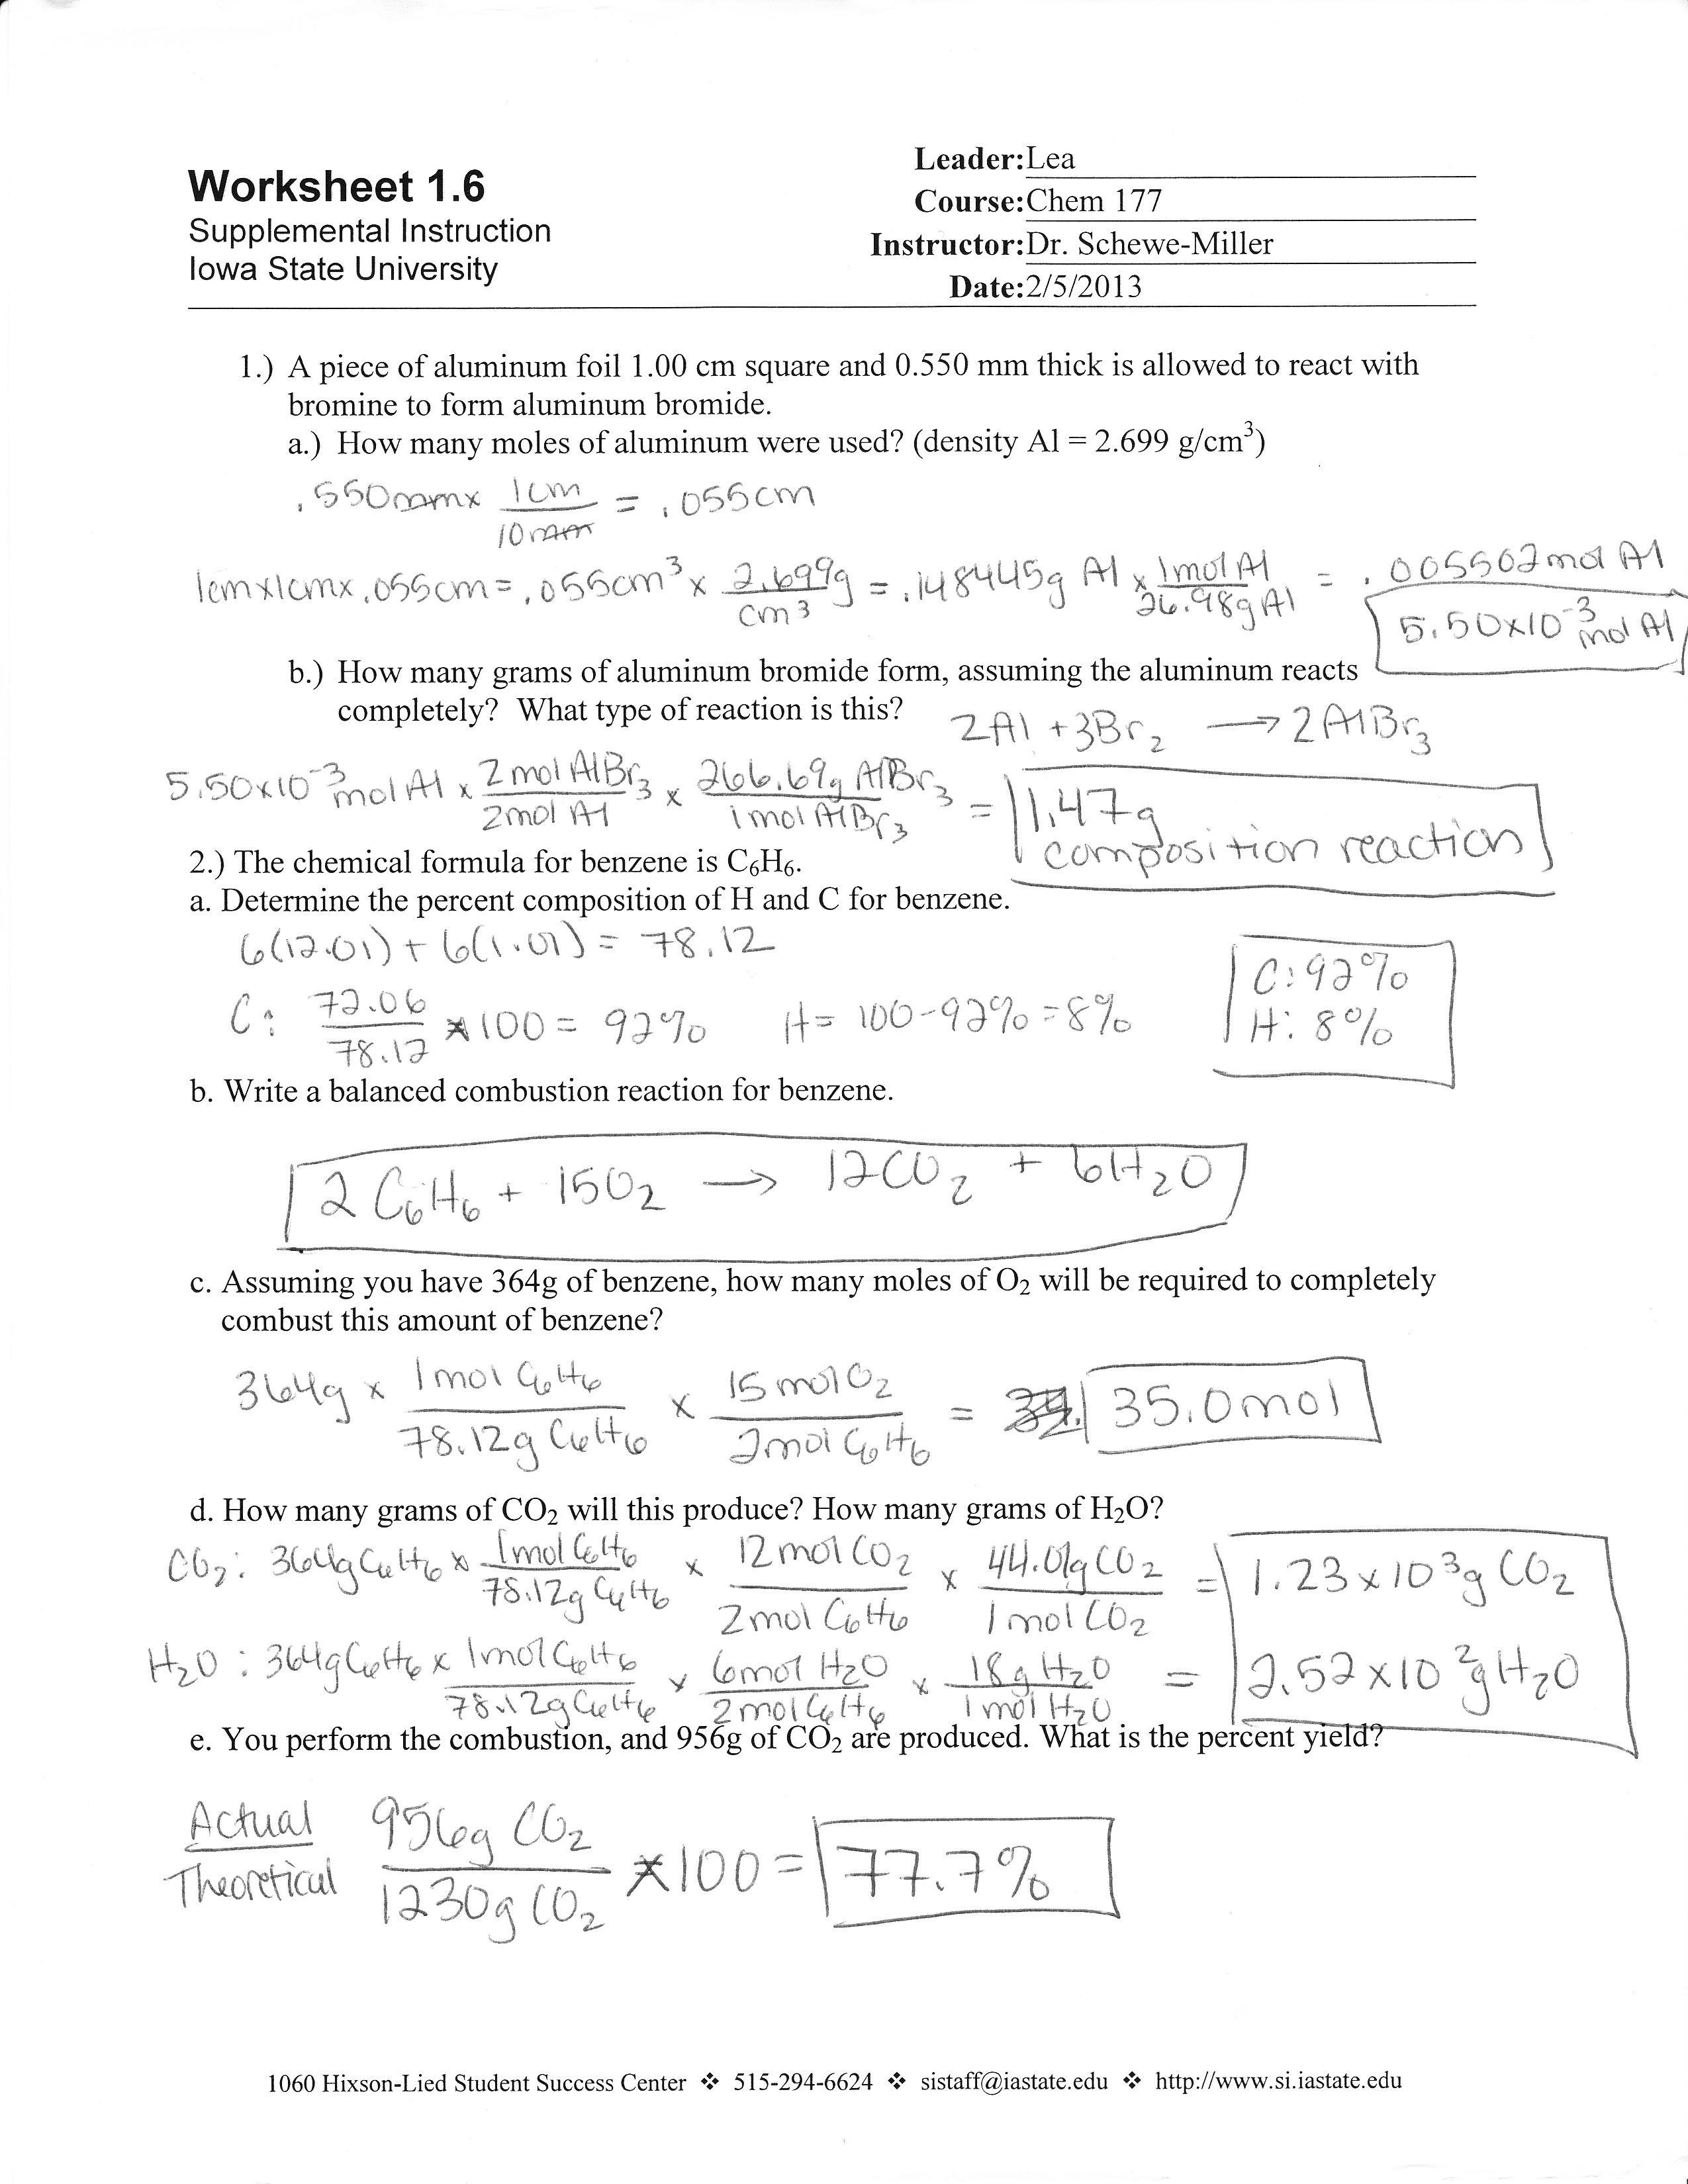 10-best-images-of-stoichiometry-worksheet-2-answer-key-chemistry-stoichiometry-worksheet